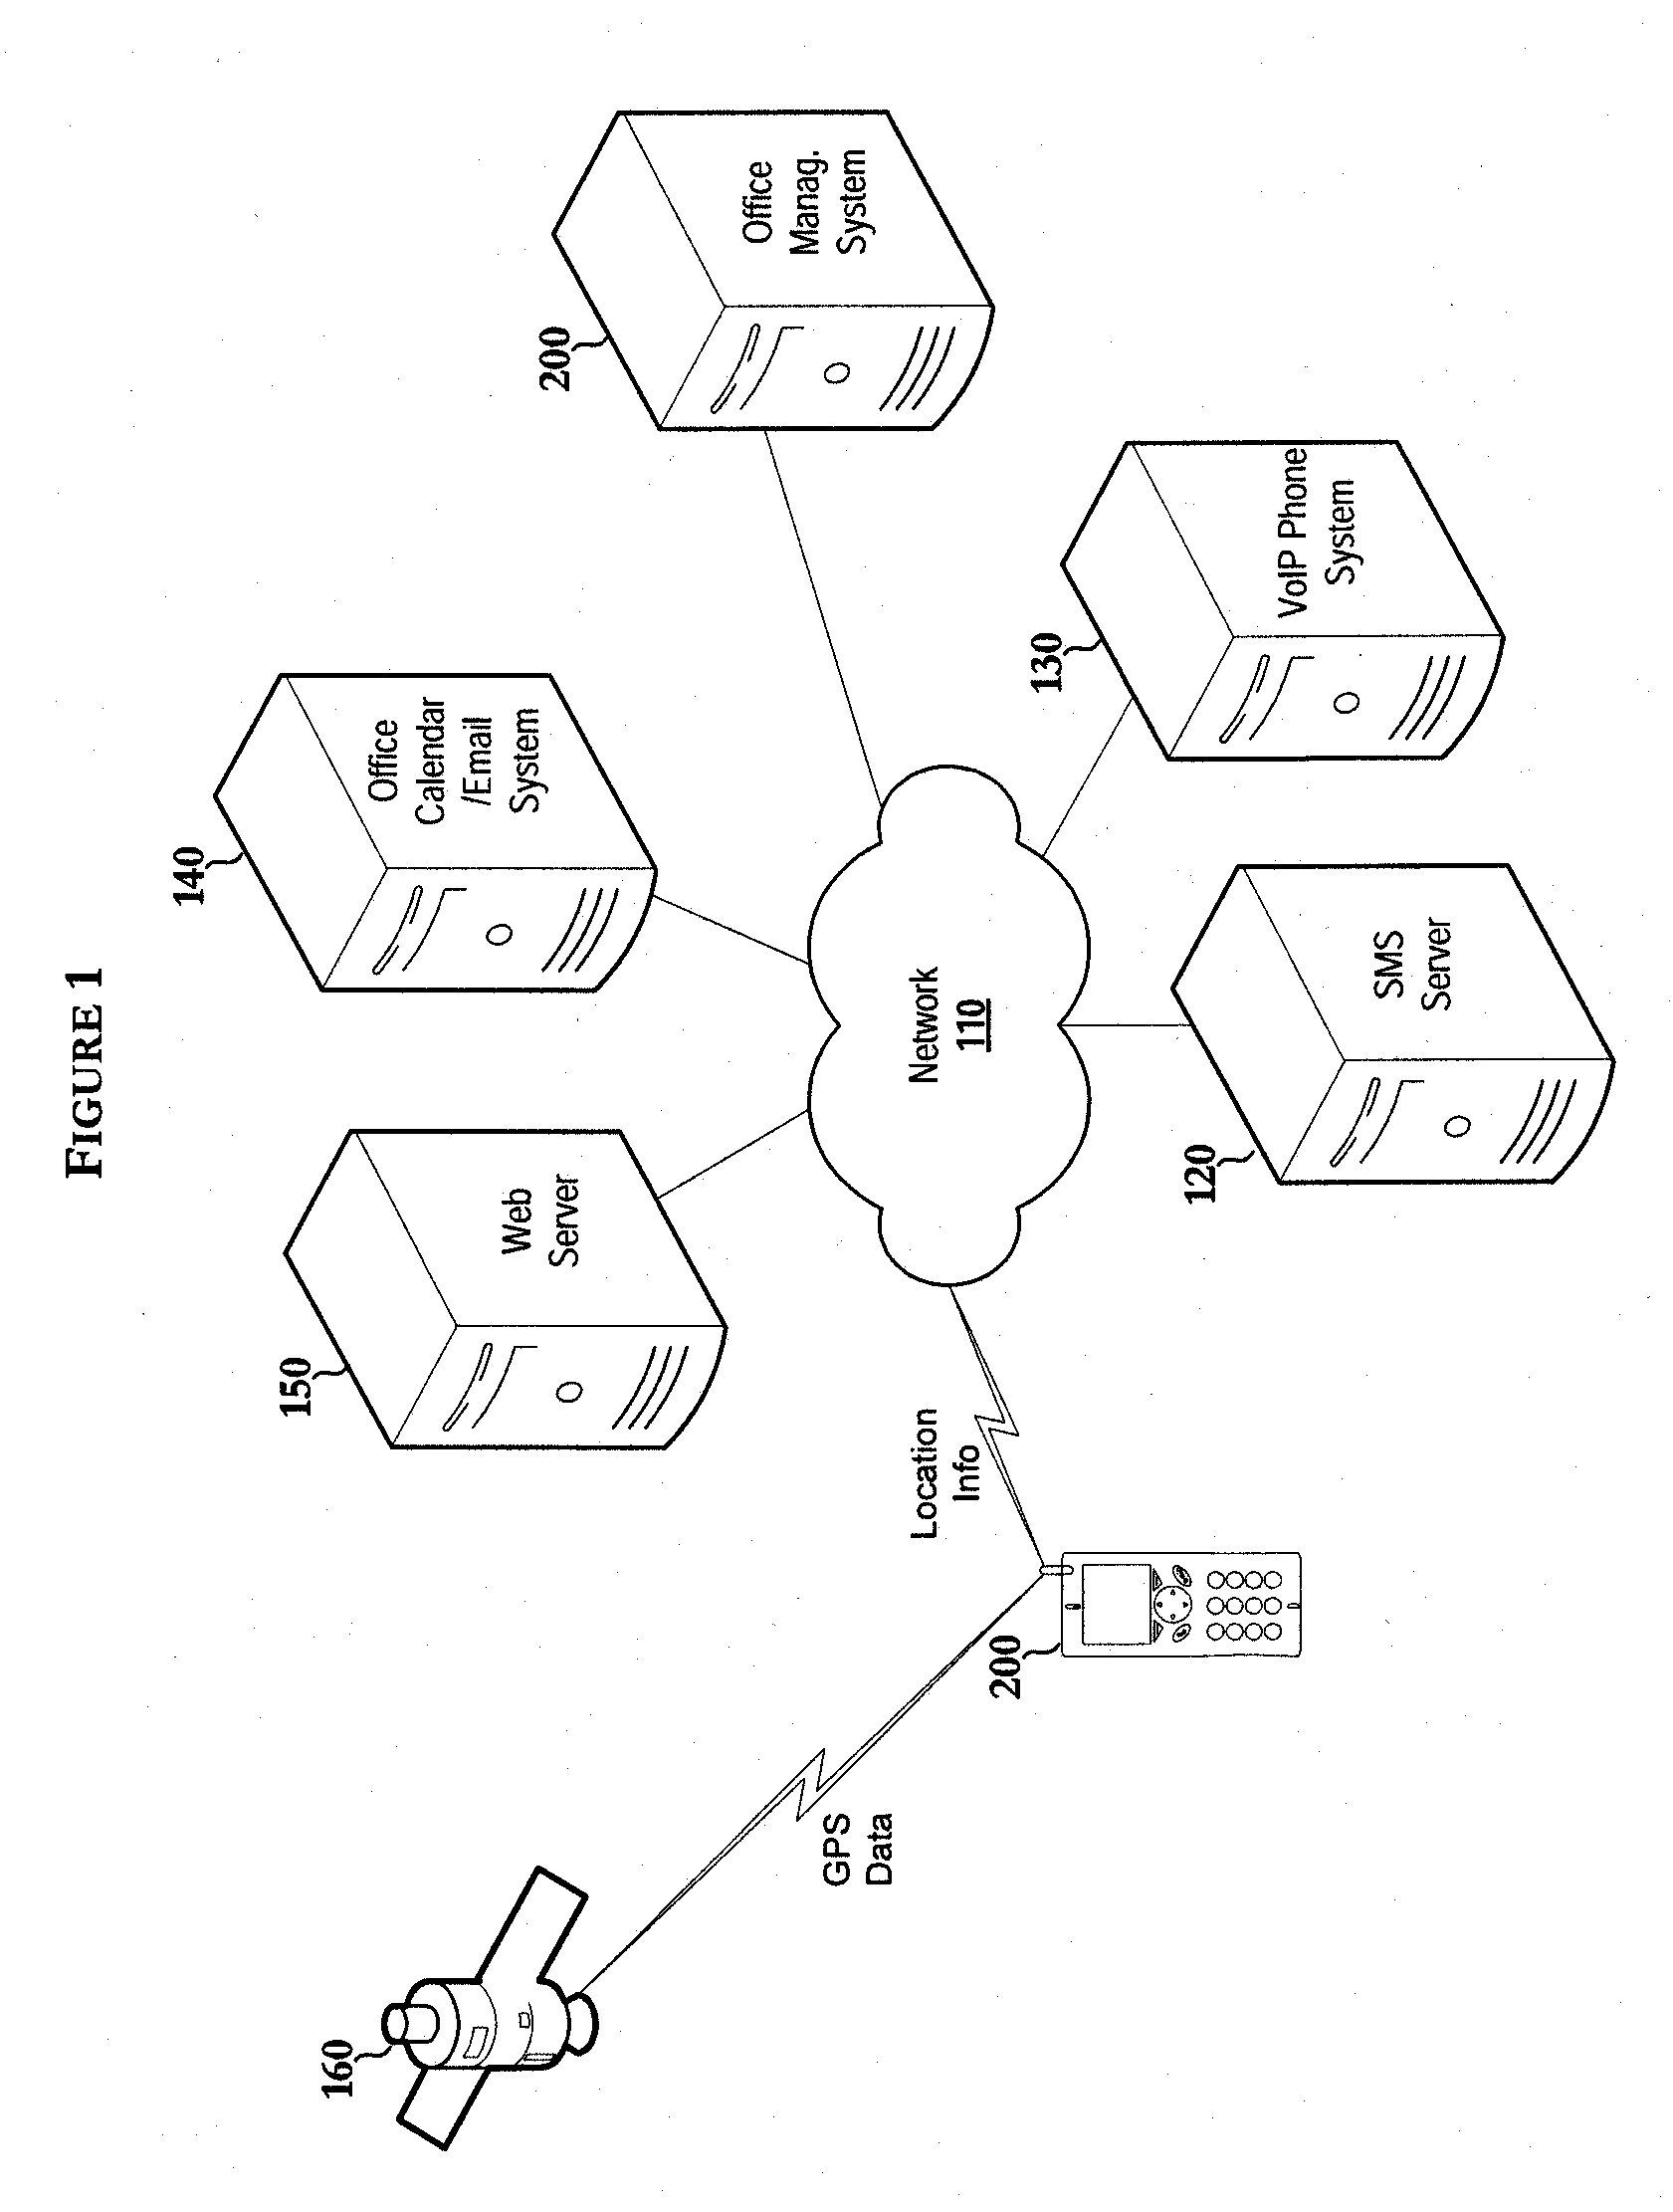 System and method for automating travel related features